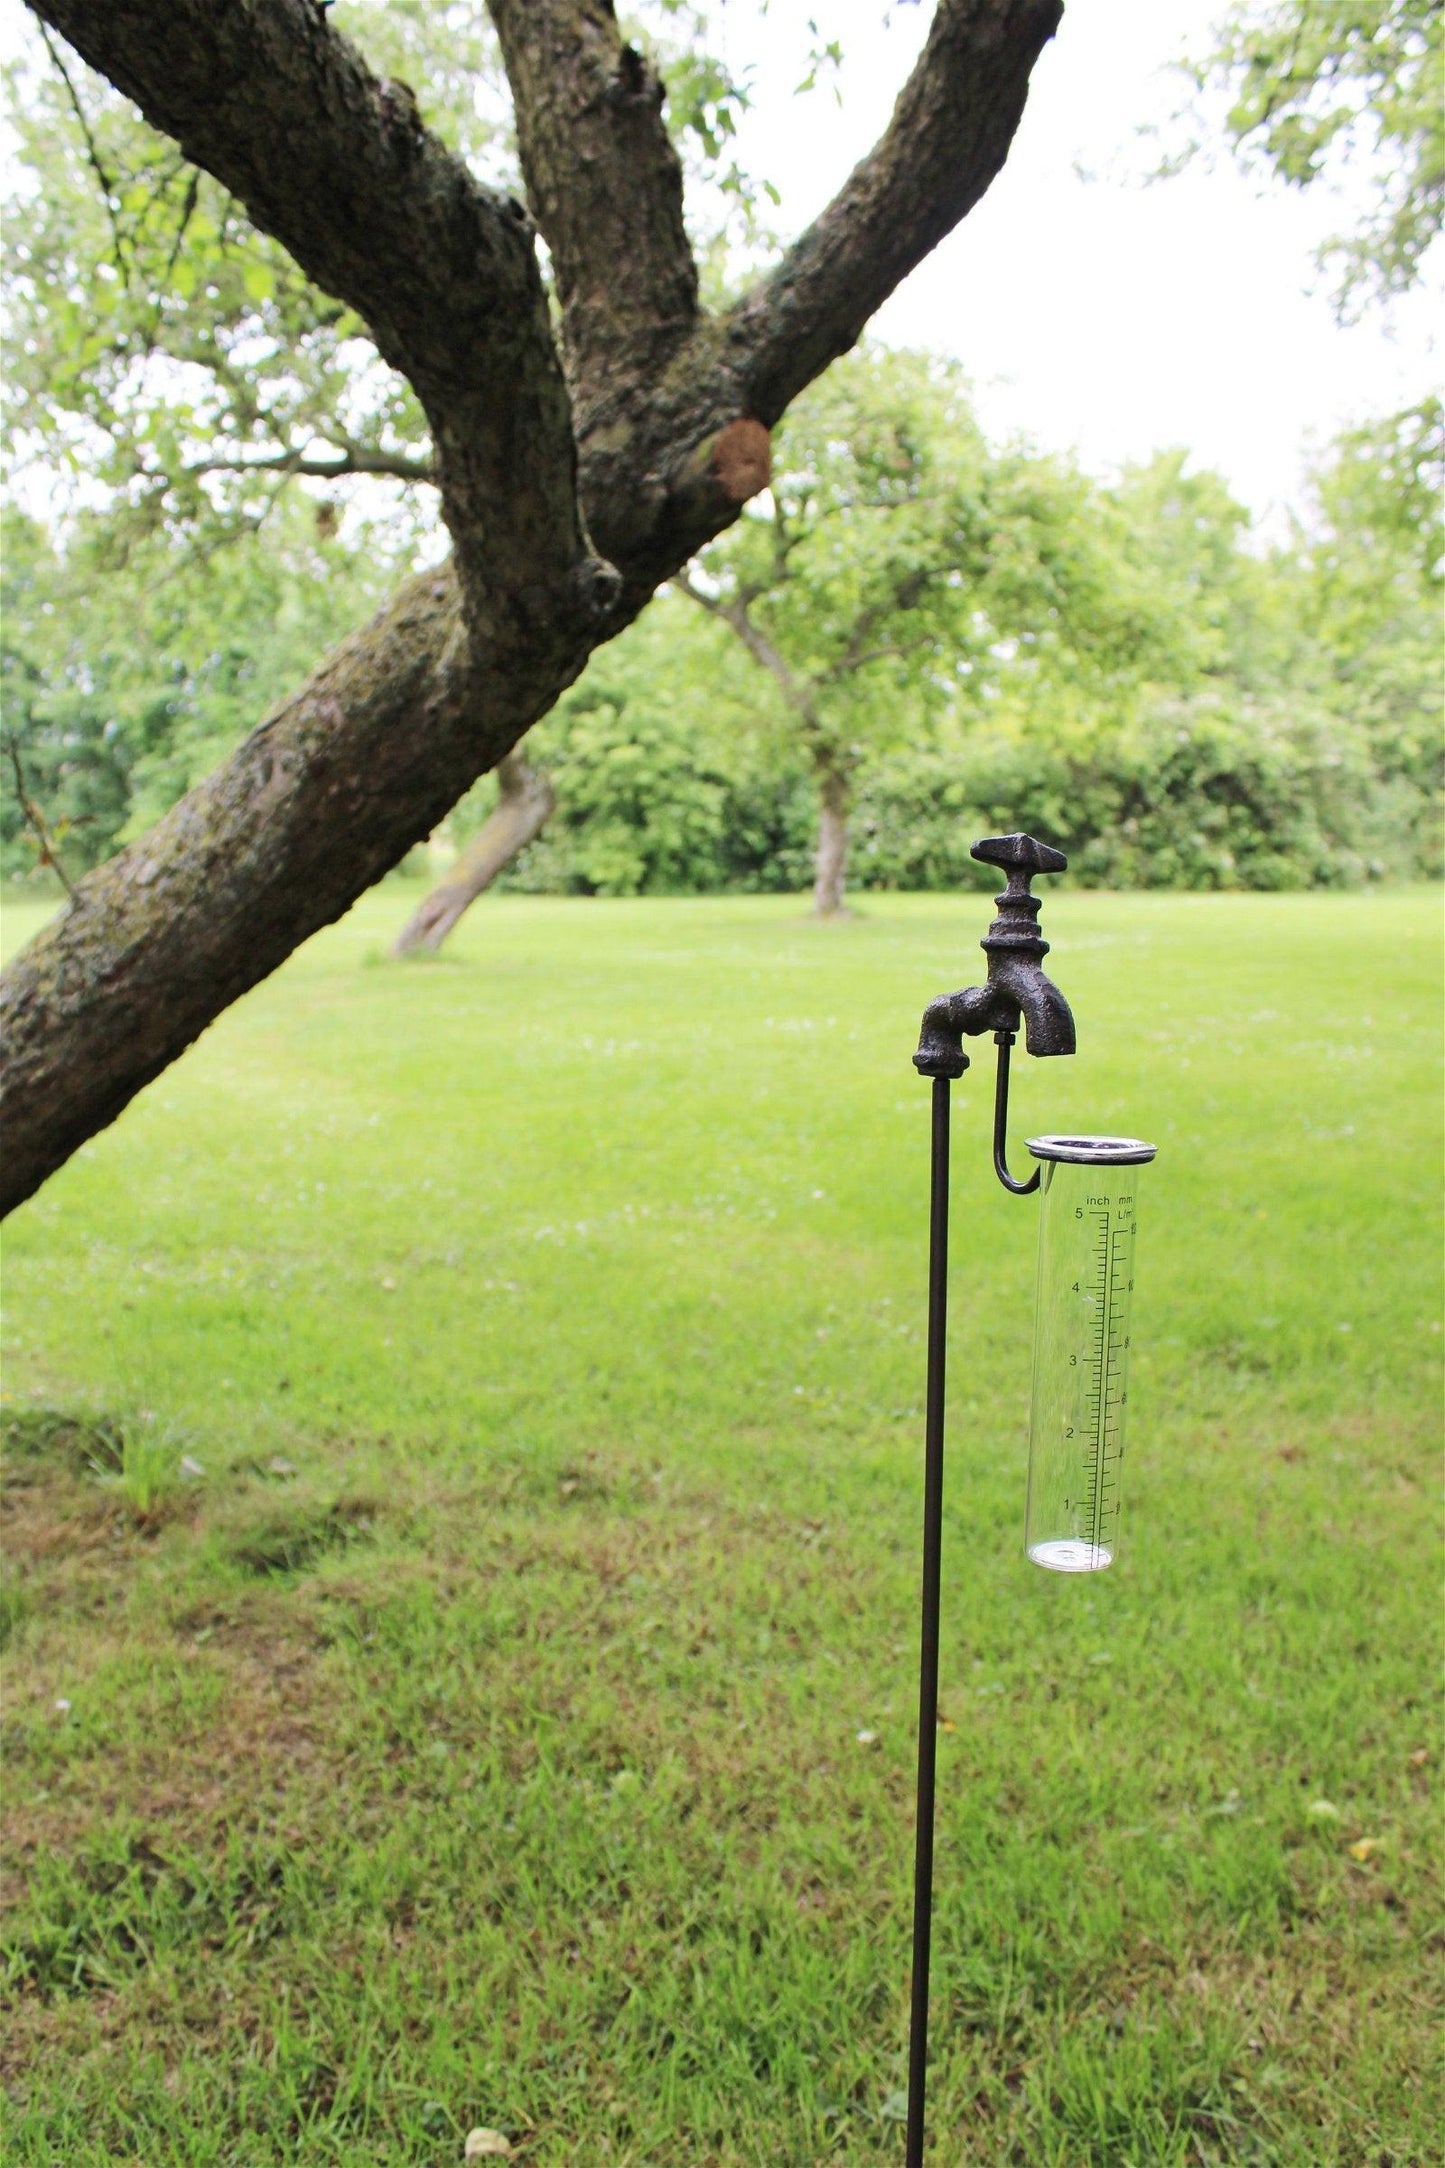 Cast Iron and Glass Garden Rain Gauge, Outside Tap Weather Stake